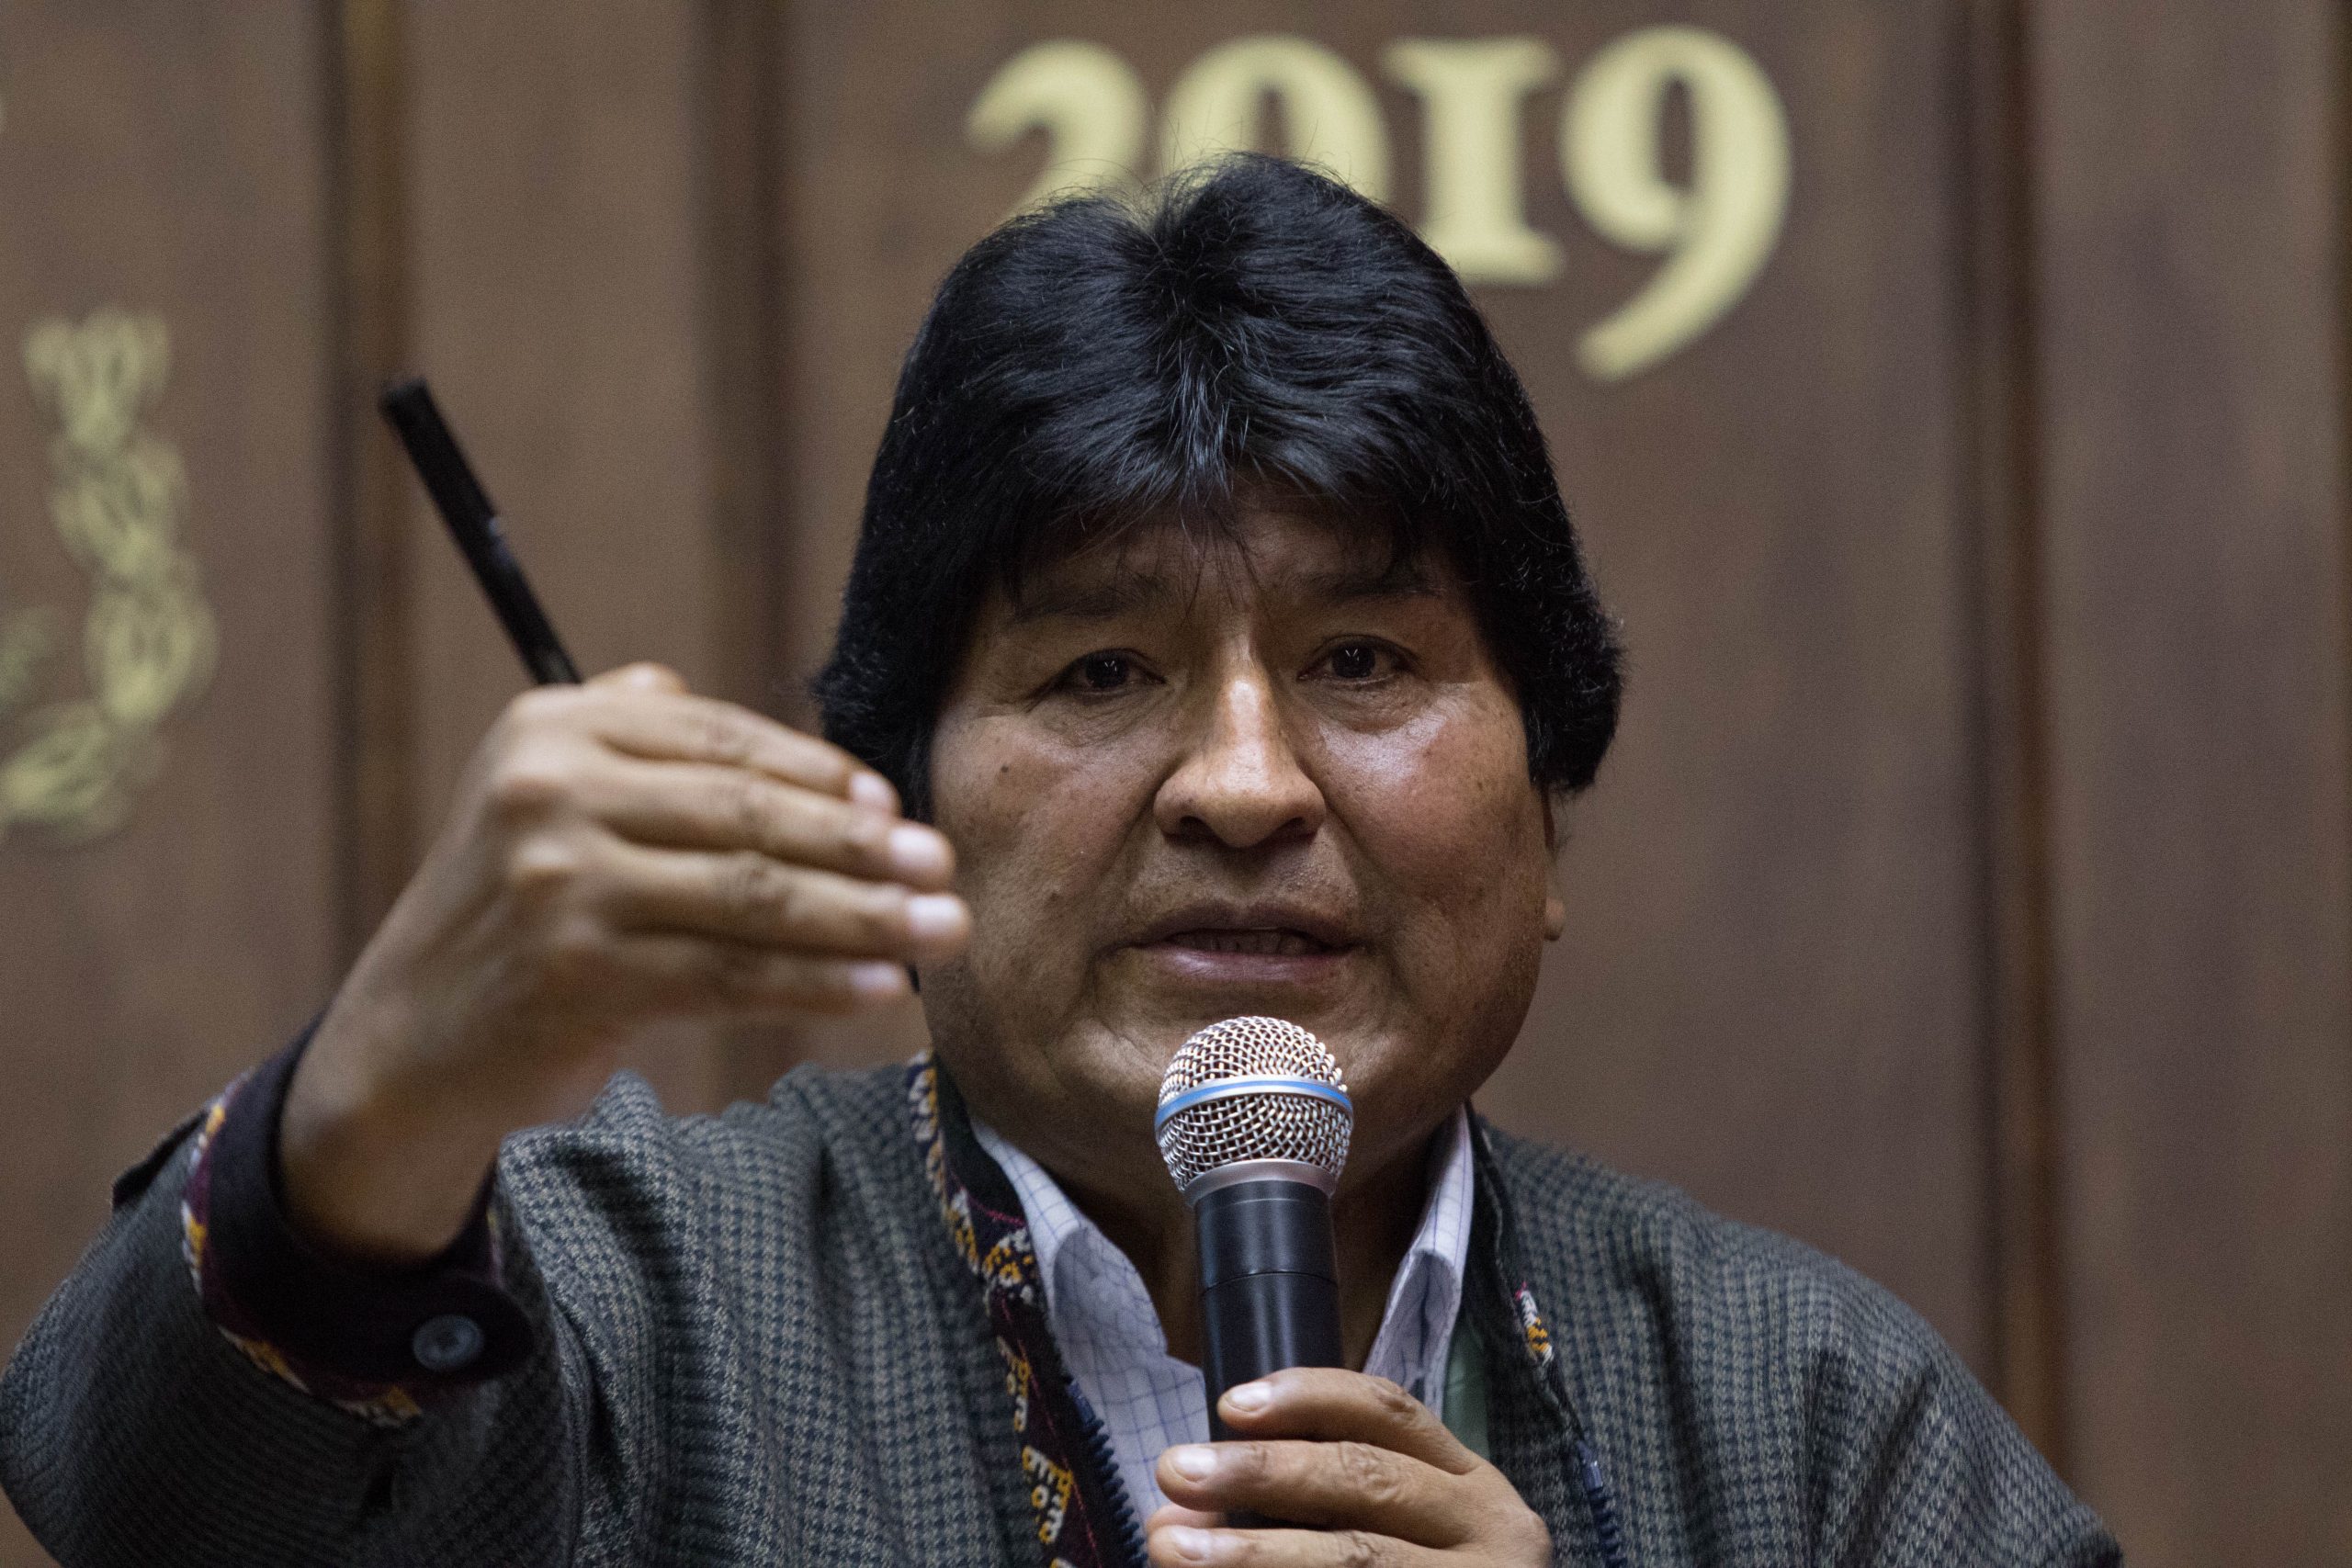 epa08029931 The former president of Bolivia Evo Morales, speaks during a press conference in Mexico City, Mexico, 27 November 2019. A day earlier, Evo Morales moved to a home in Mexico City from a military camp where he will no longer receive support from the Mexican government.  EPA/Str